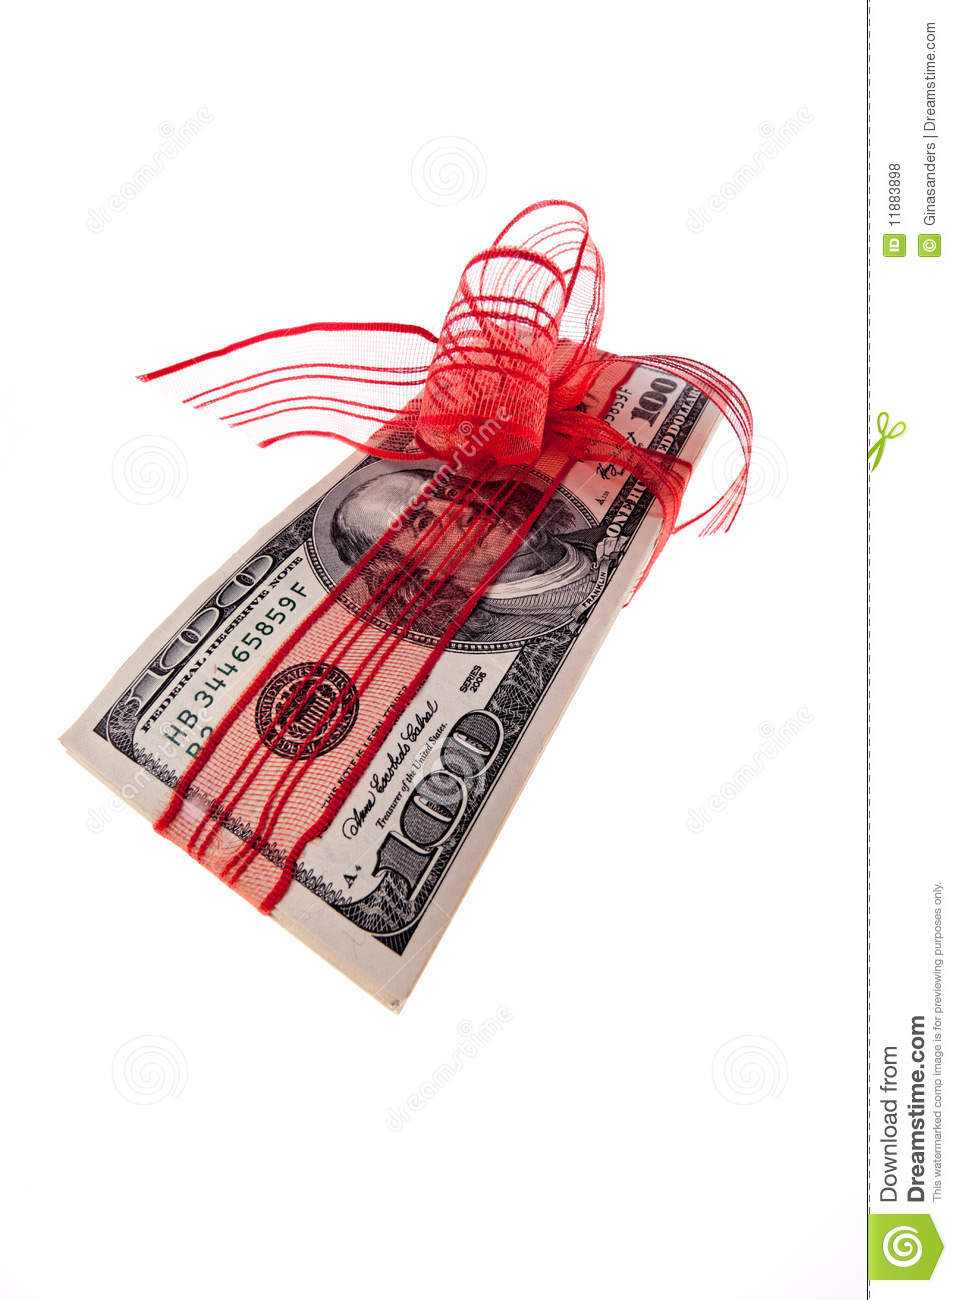 Red Bow On  100 Bill Royalty Free Stock Photos   Image  11883898